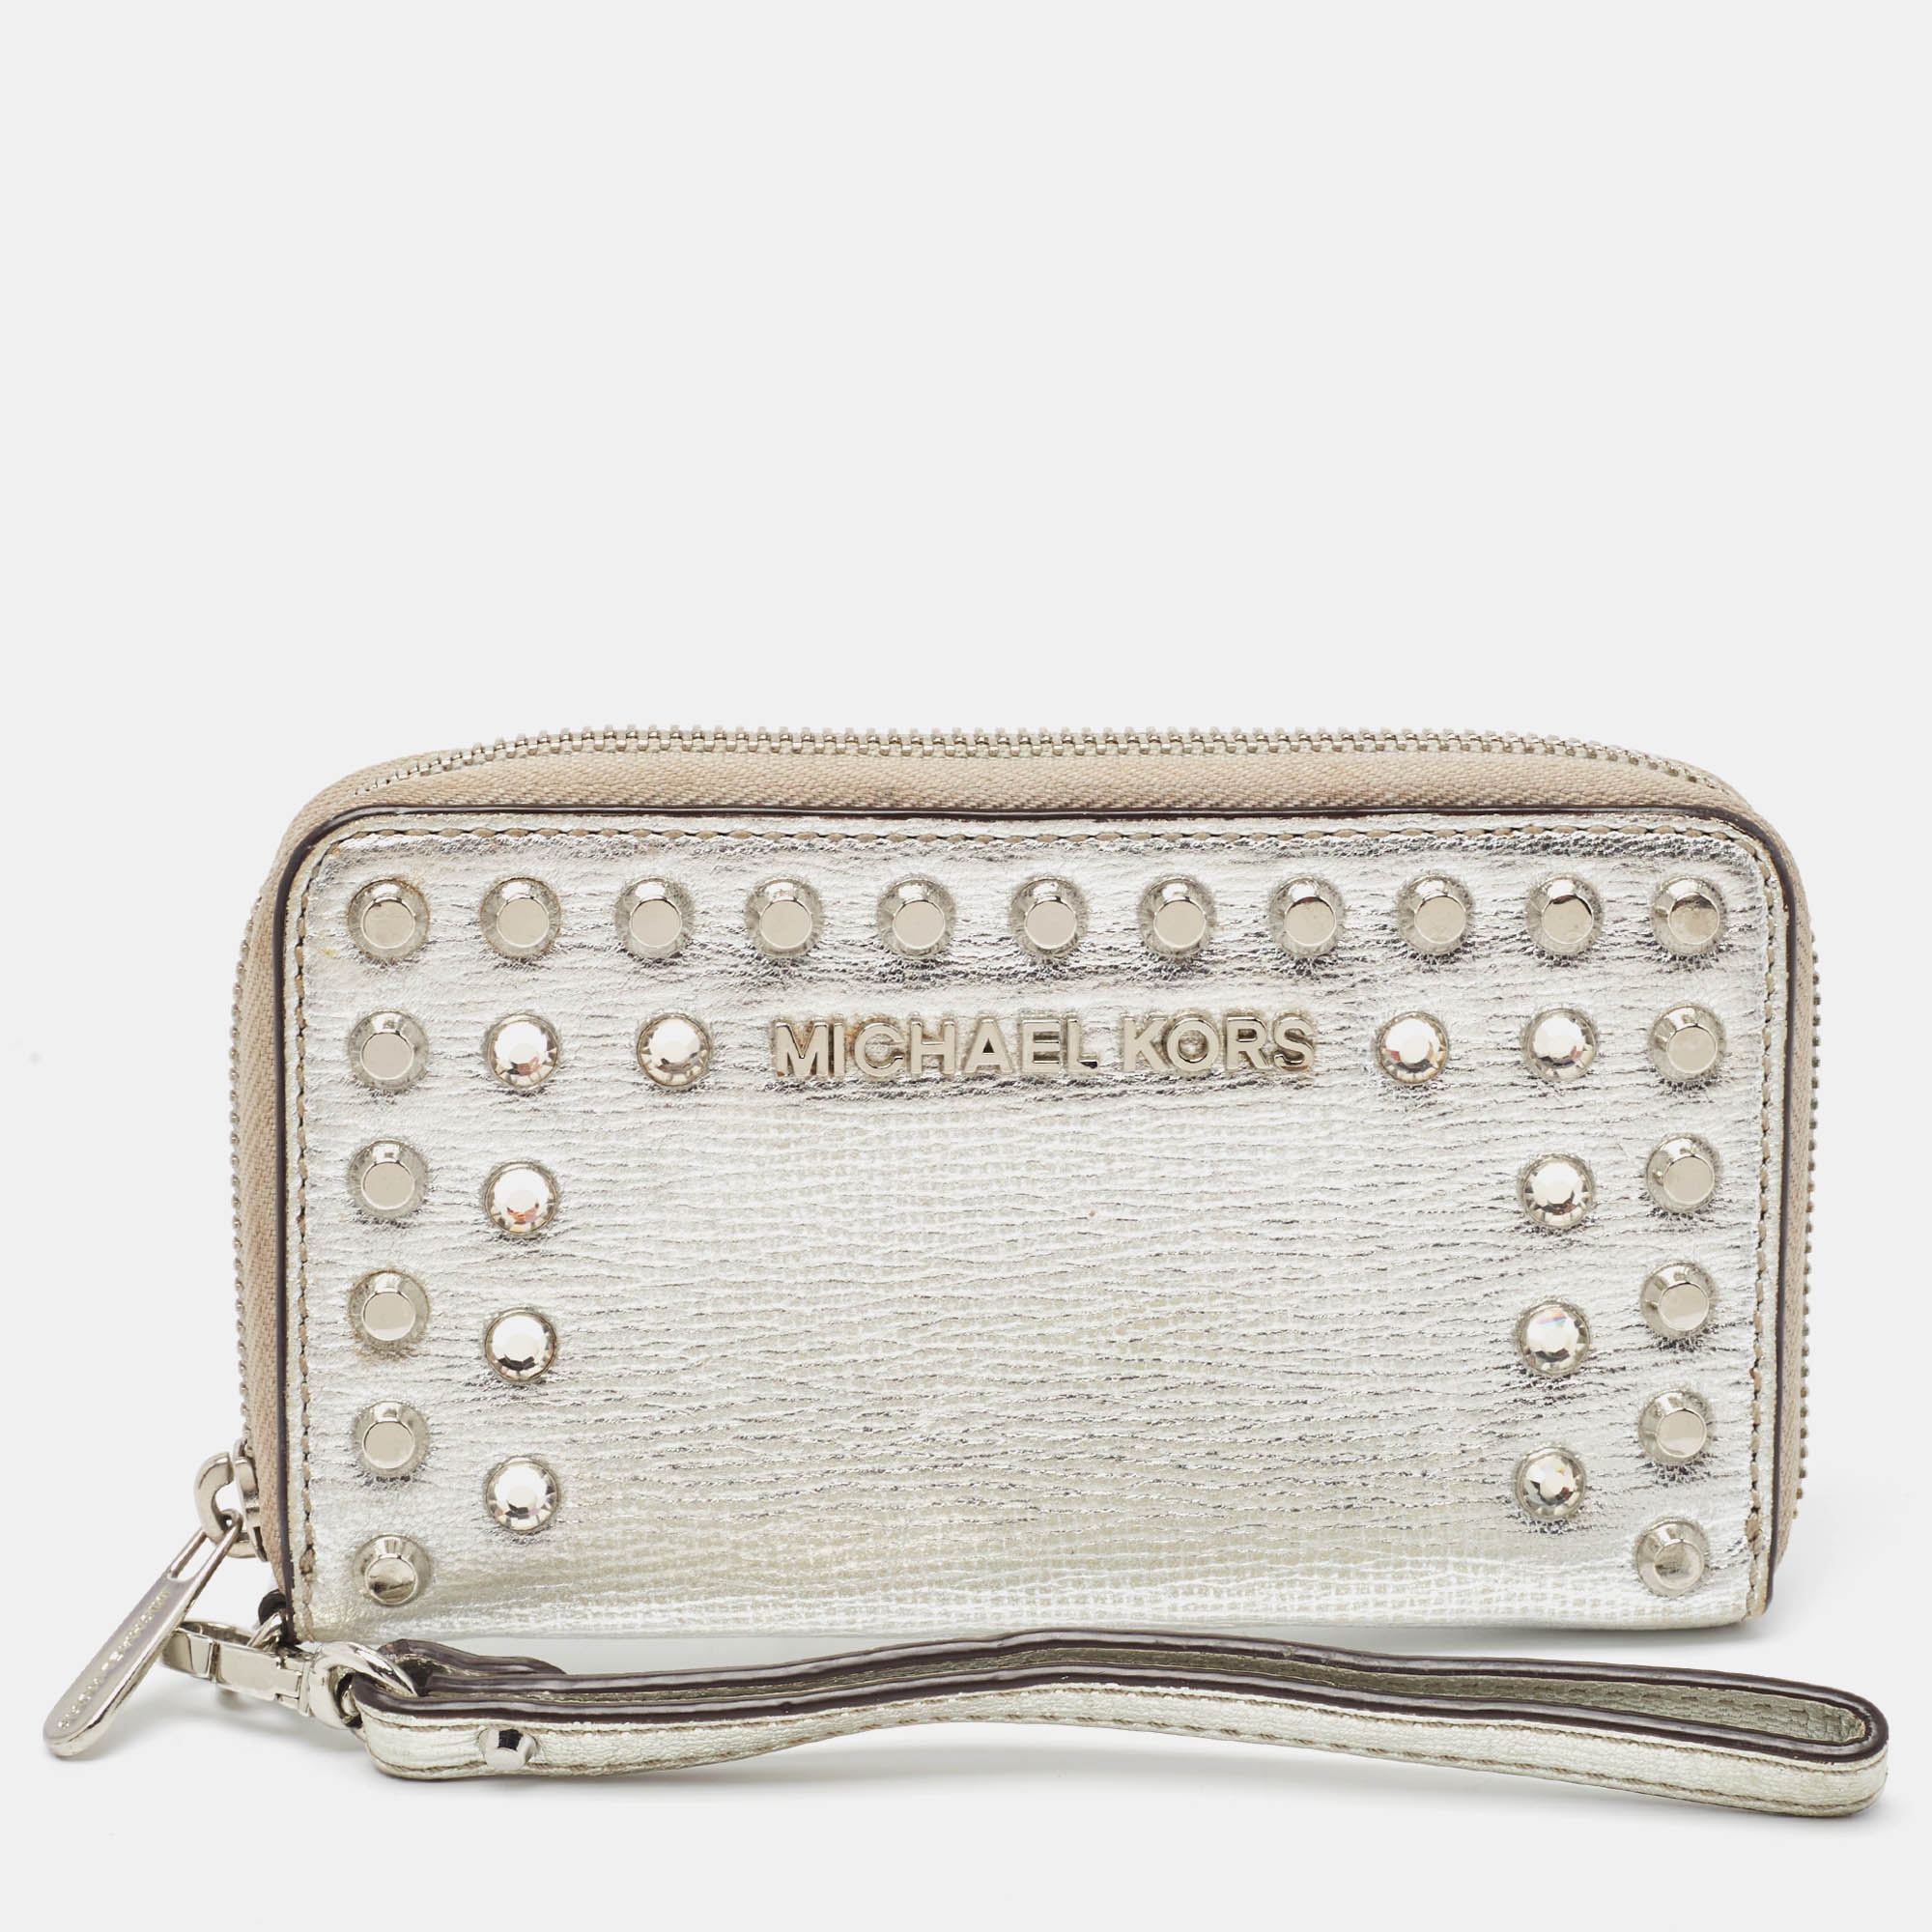 Pre-owned Michael Kors Silver Crystal Studded Zip Around Wristlet Wallet